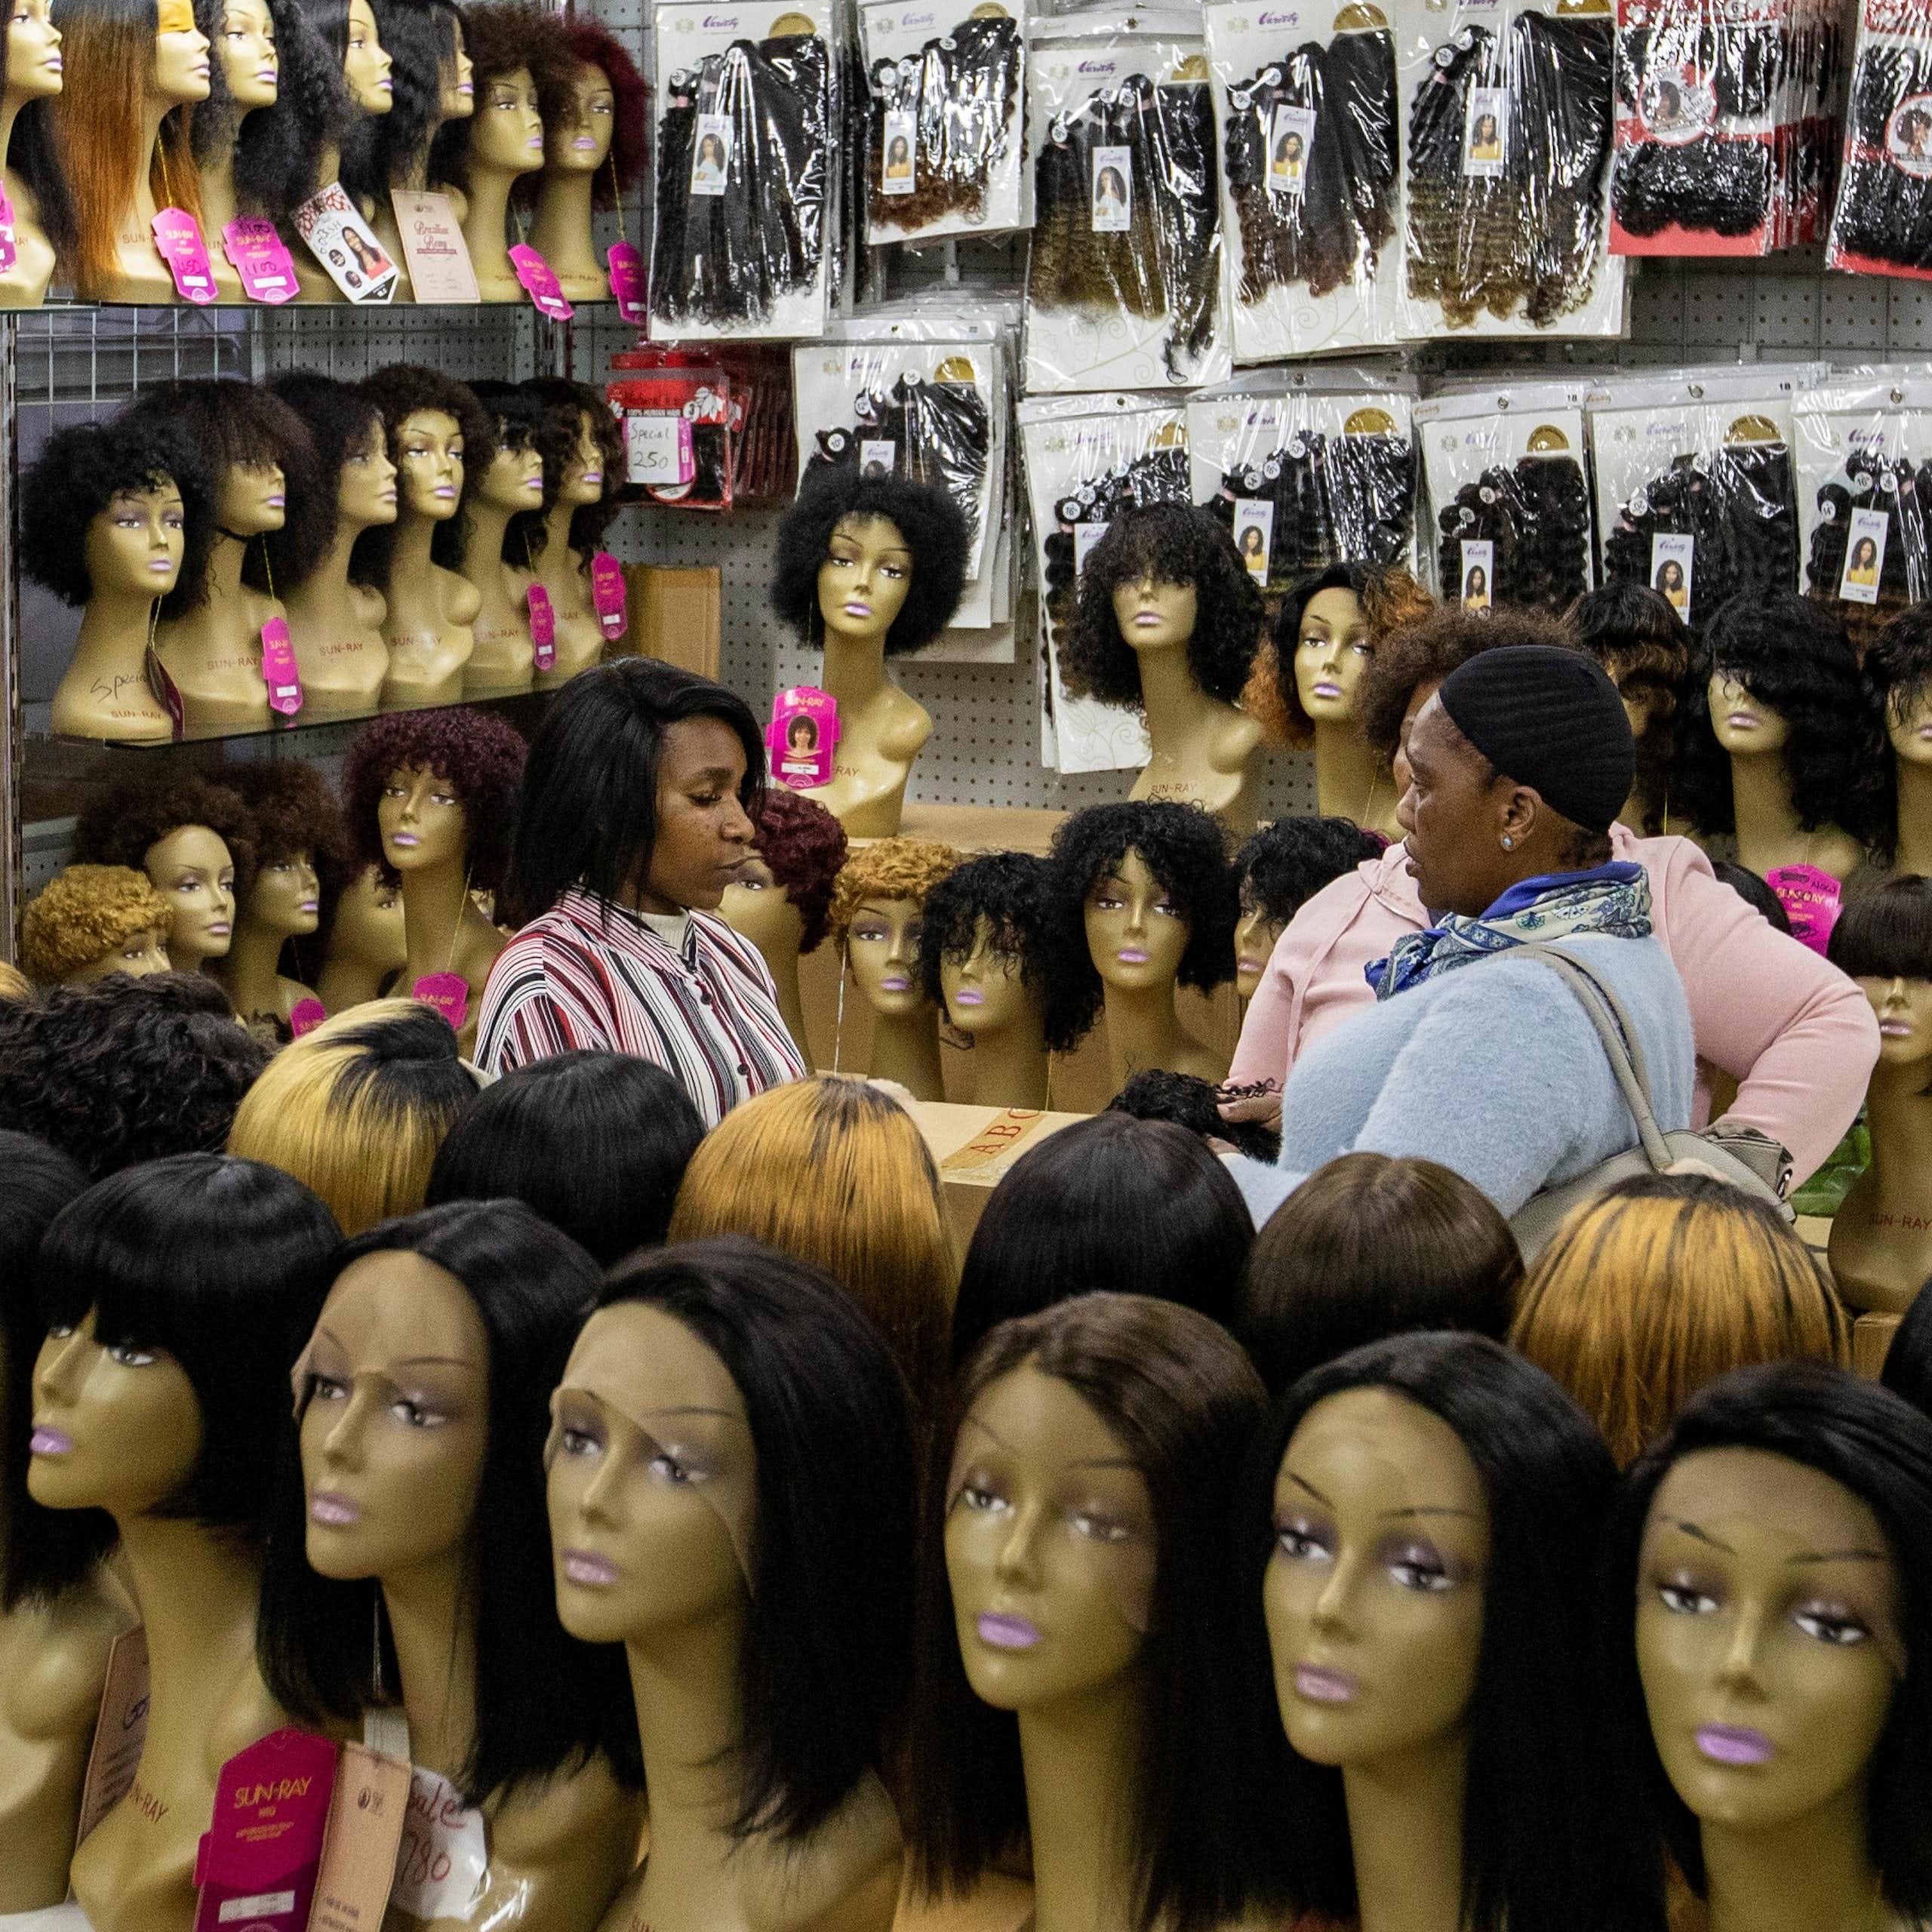 Your wig could be poisoning you: study finds pesticides and other toxic chemicals in synthetic hair in Nigeria